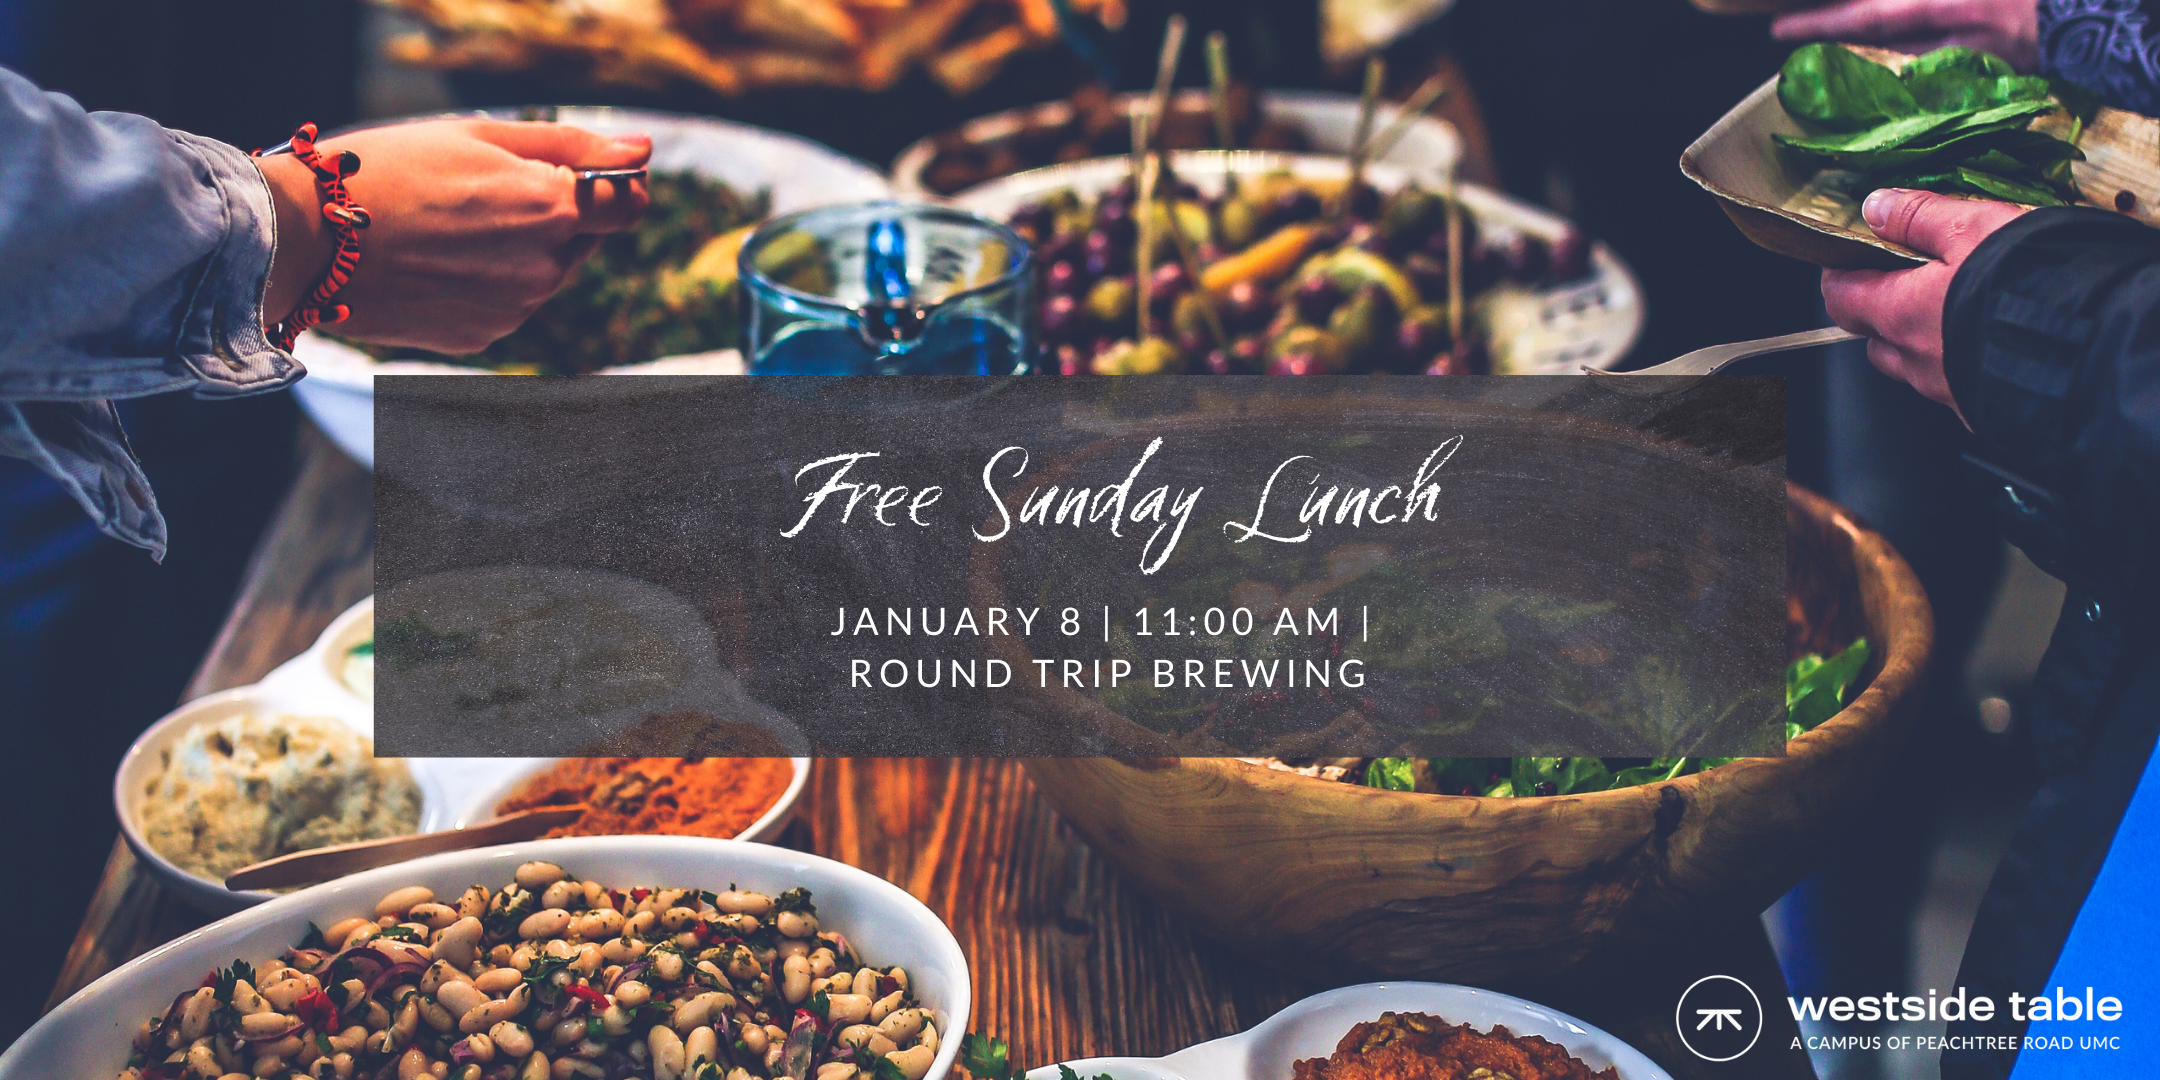 Image text says "Free Sunday Lunch: January 8th, 11am, Round Trip Brewing." The text is written in white chalk and the background image shows a potluck scene with platters and bowls of food.